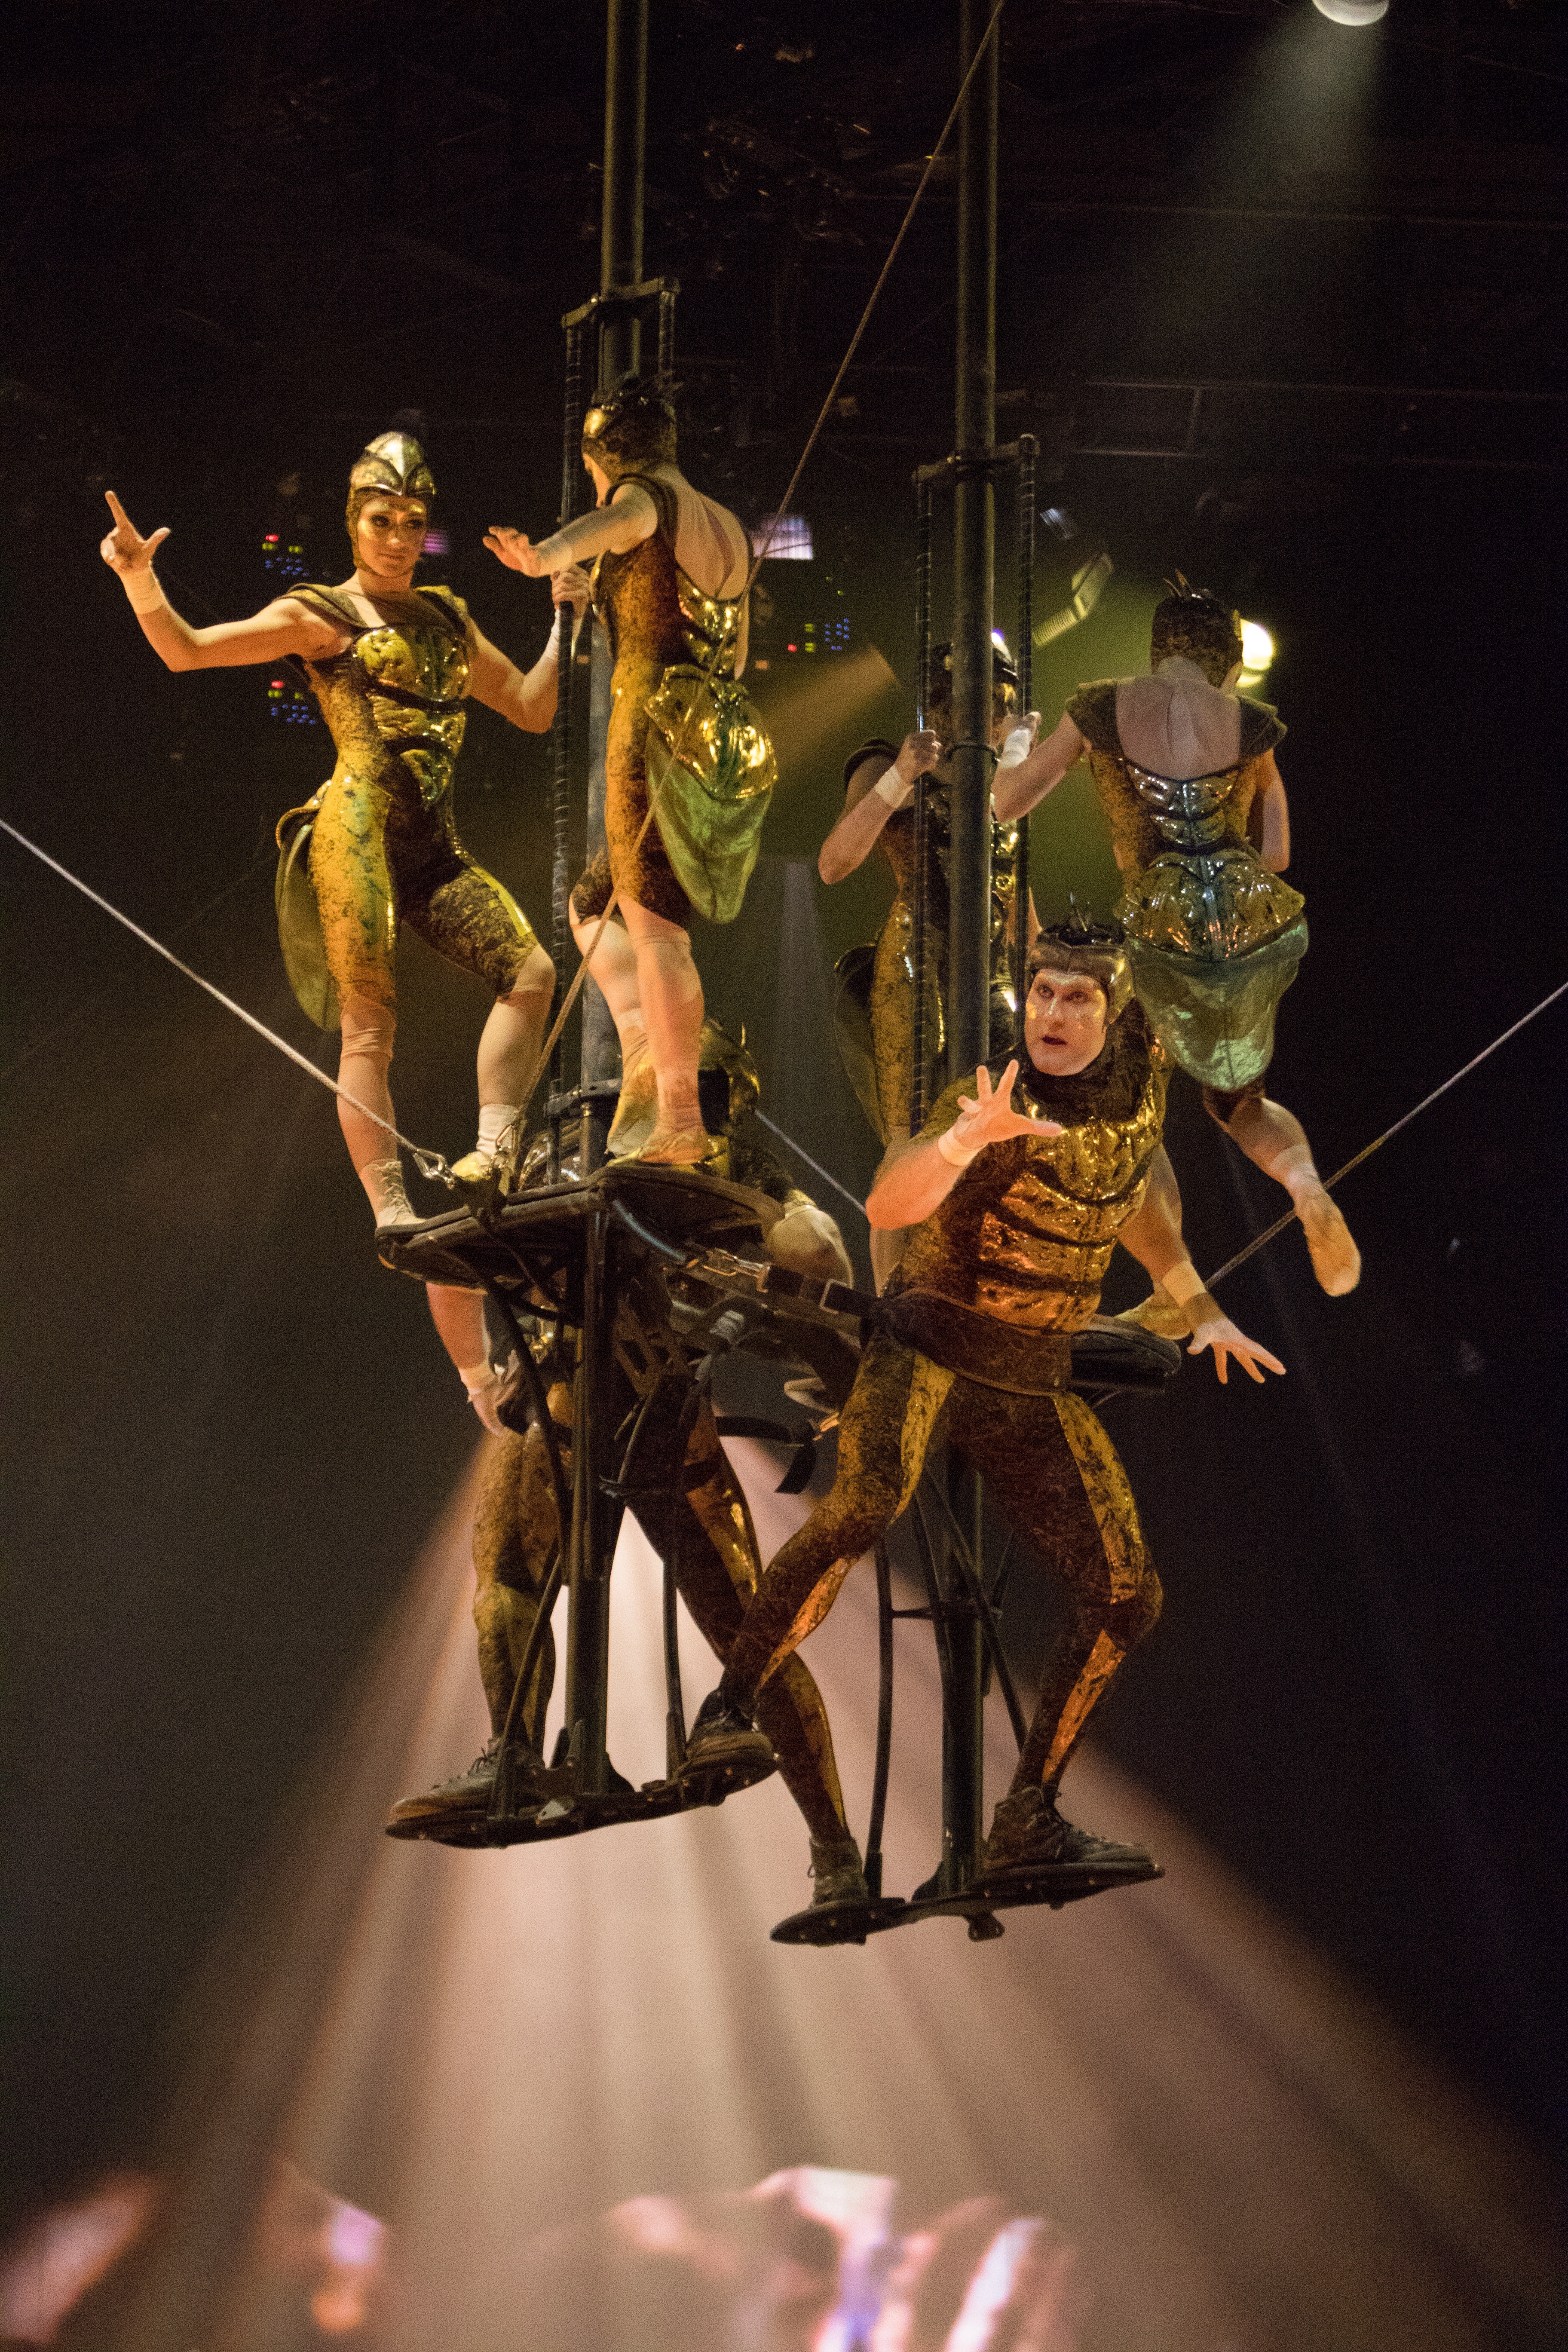 Cirque du Soleil's new show “OVO” is coming to Miami and Sunrise in July –  Outersparkle